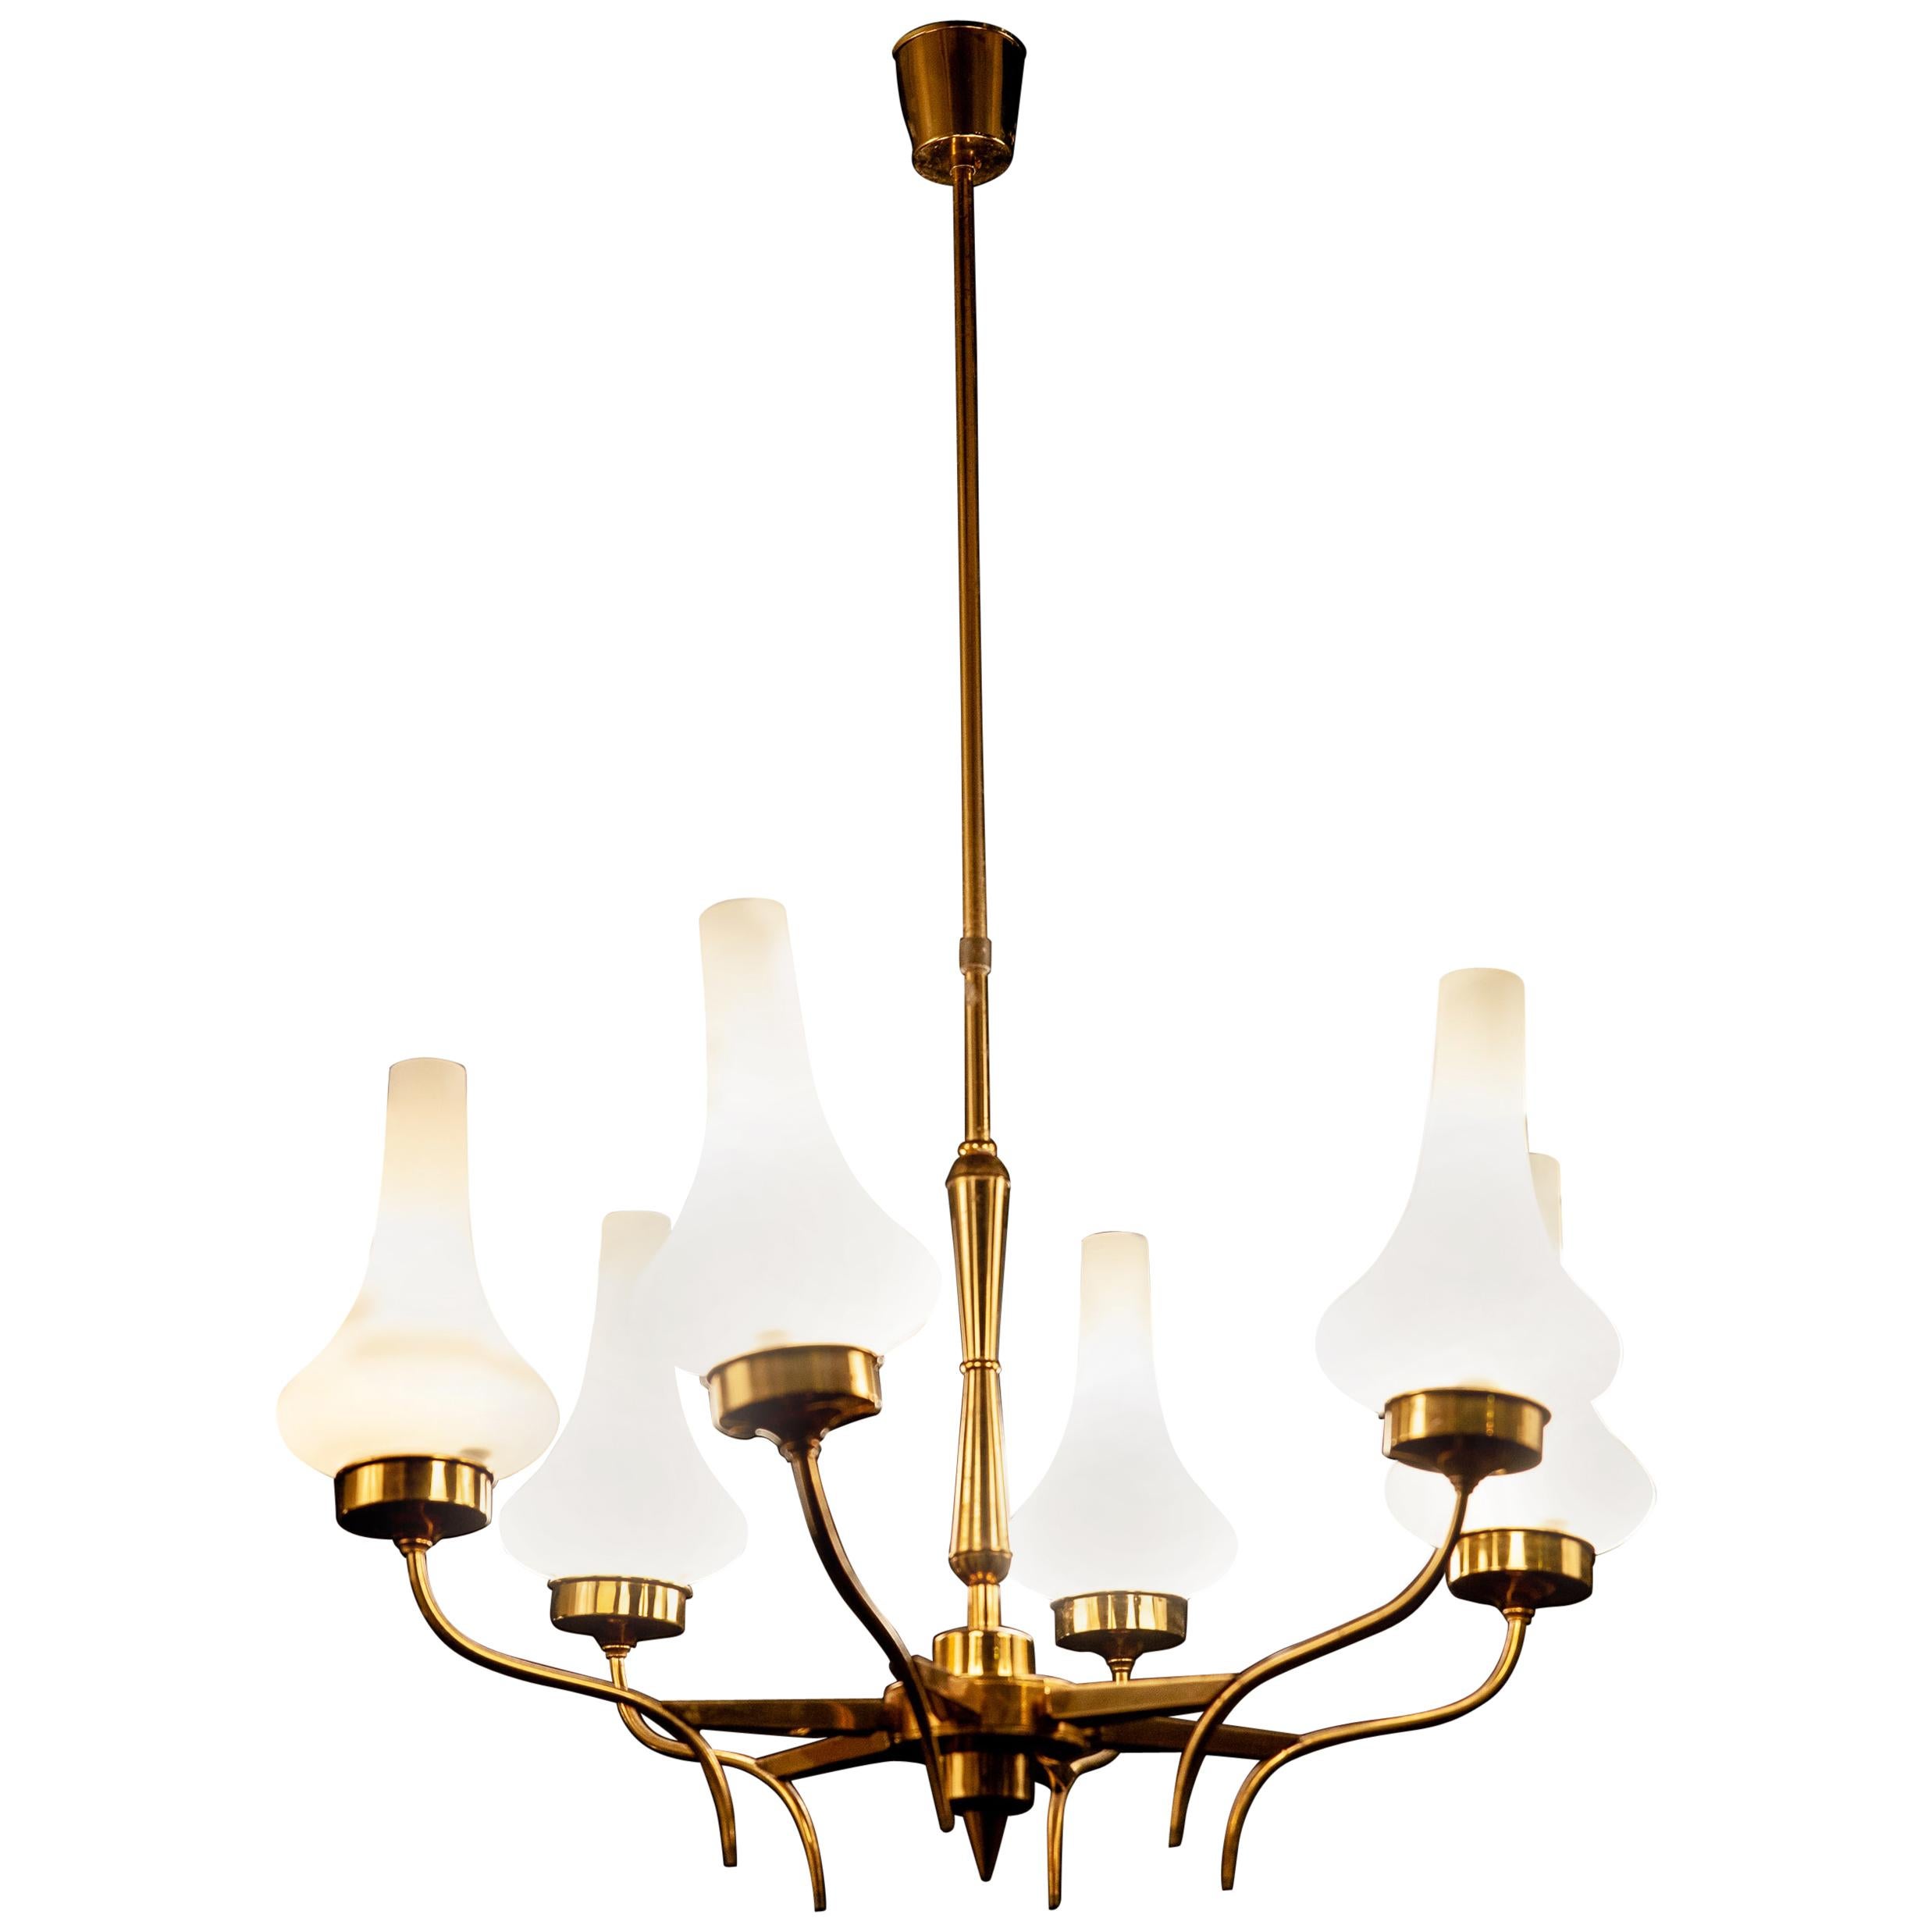 Arredoluce Attributed Midcentury Brass and Murano Glass Chandelier, Italy, 1958